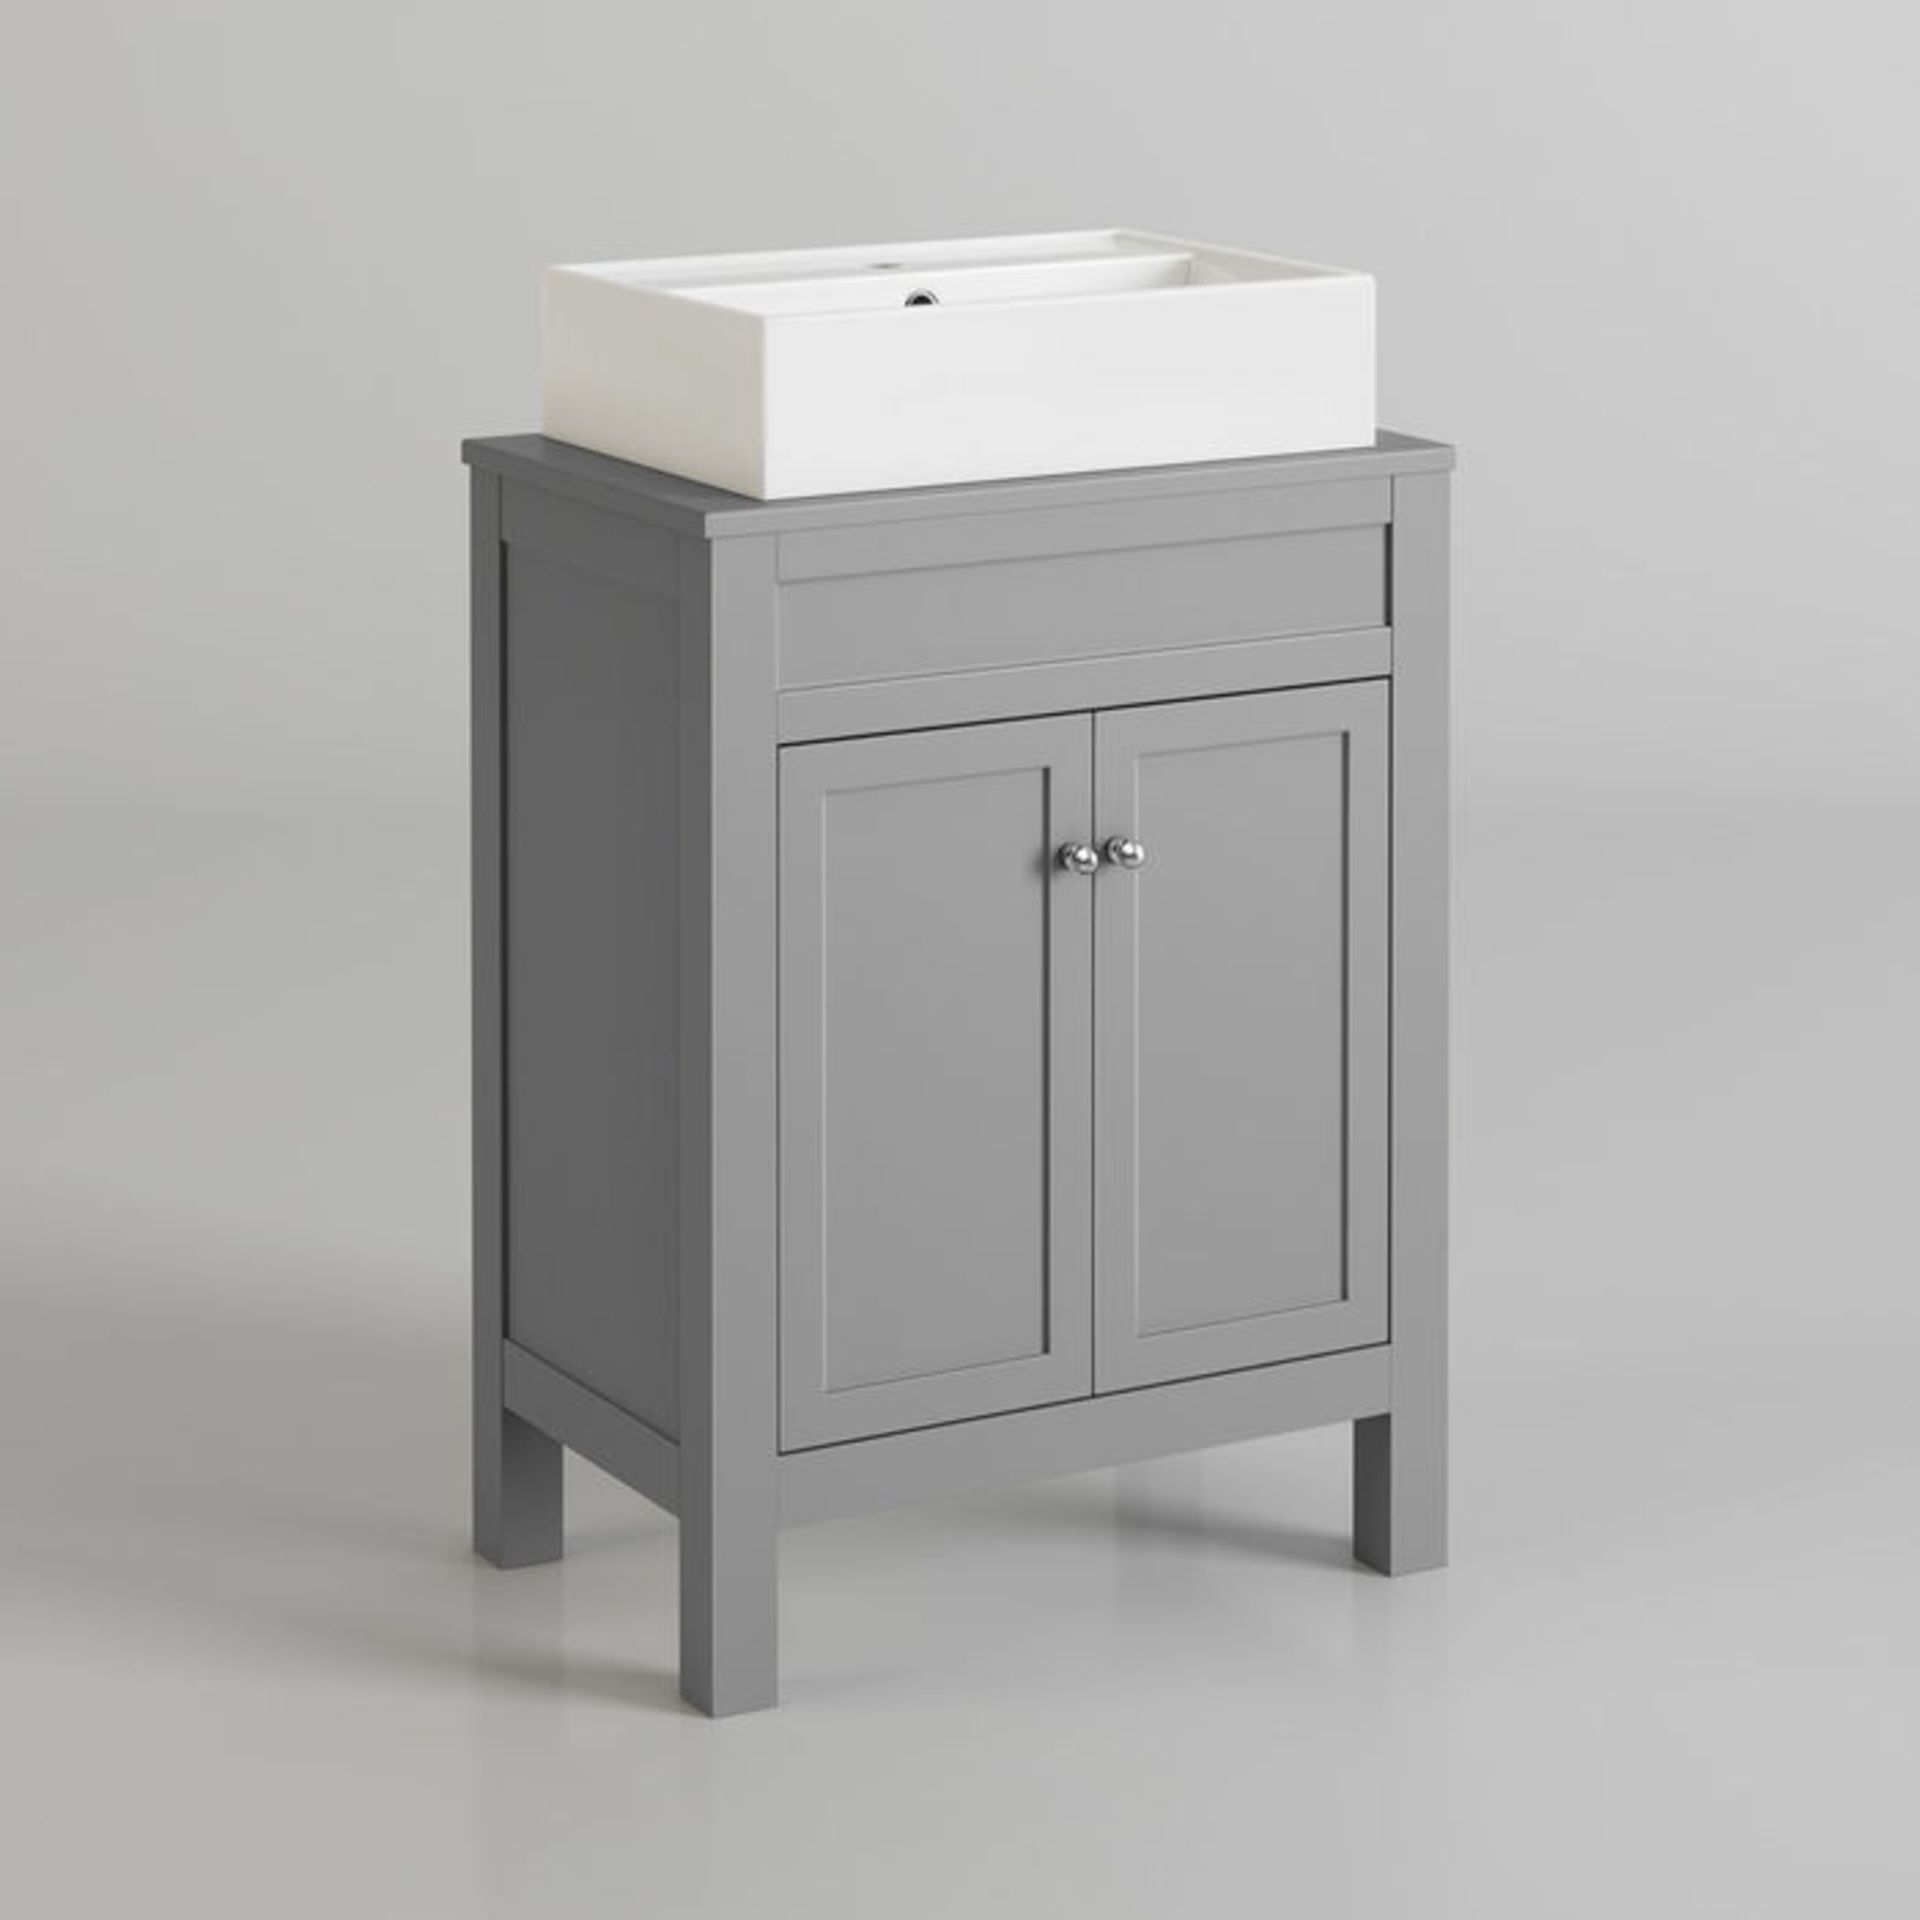 (KL72) 600mm Melbourne Grey Countertop Unit and Elisa Basin - Floor Standing. RRP £499.99. Comes - Image 4 of 4